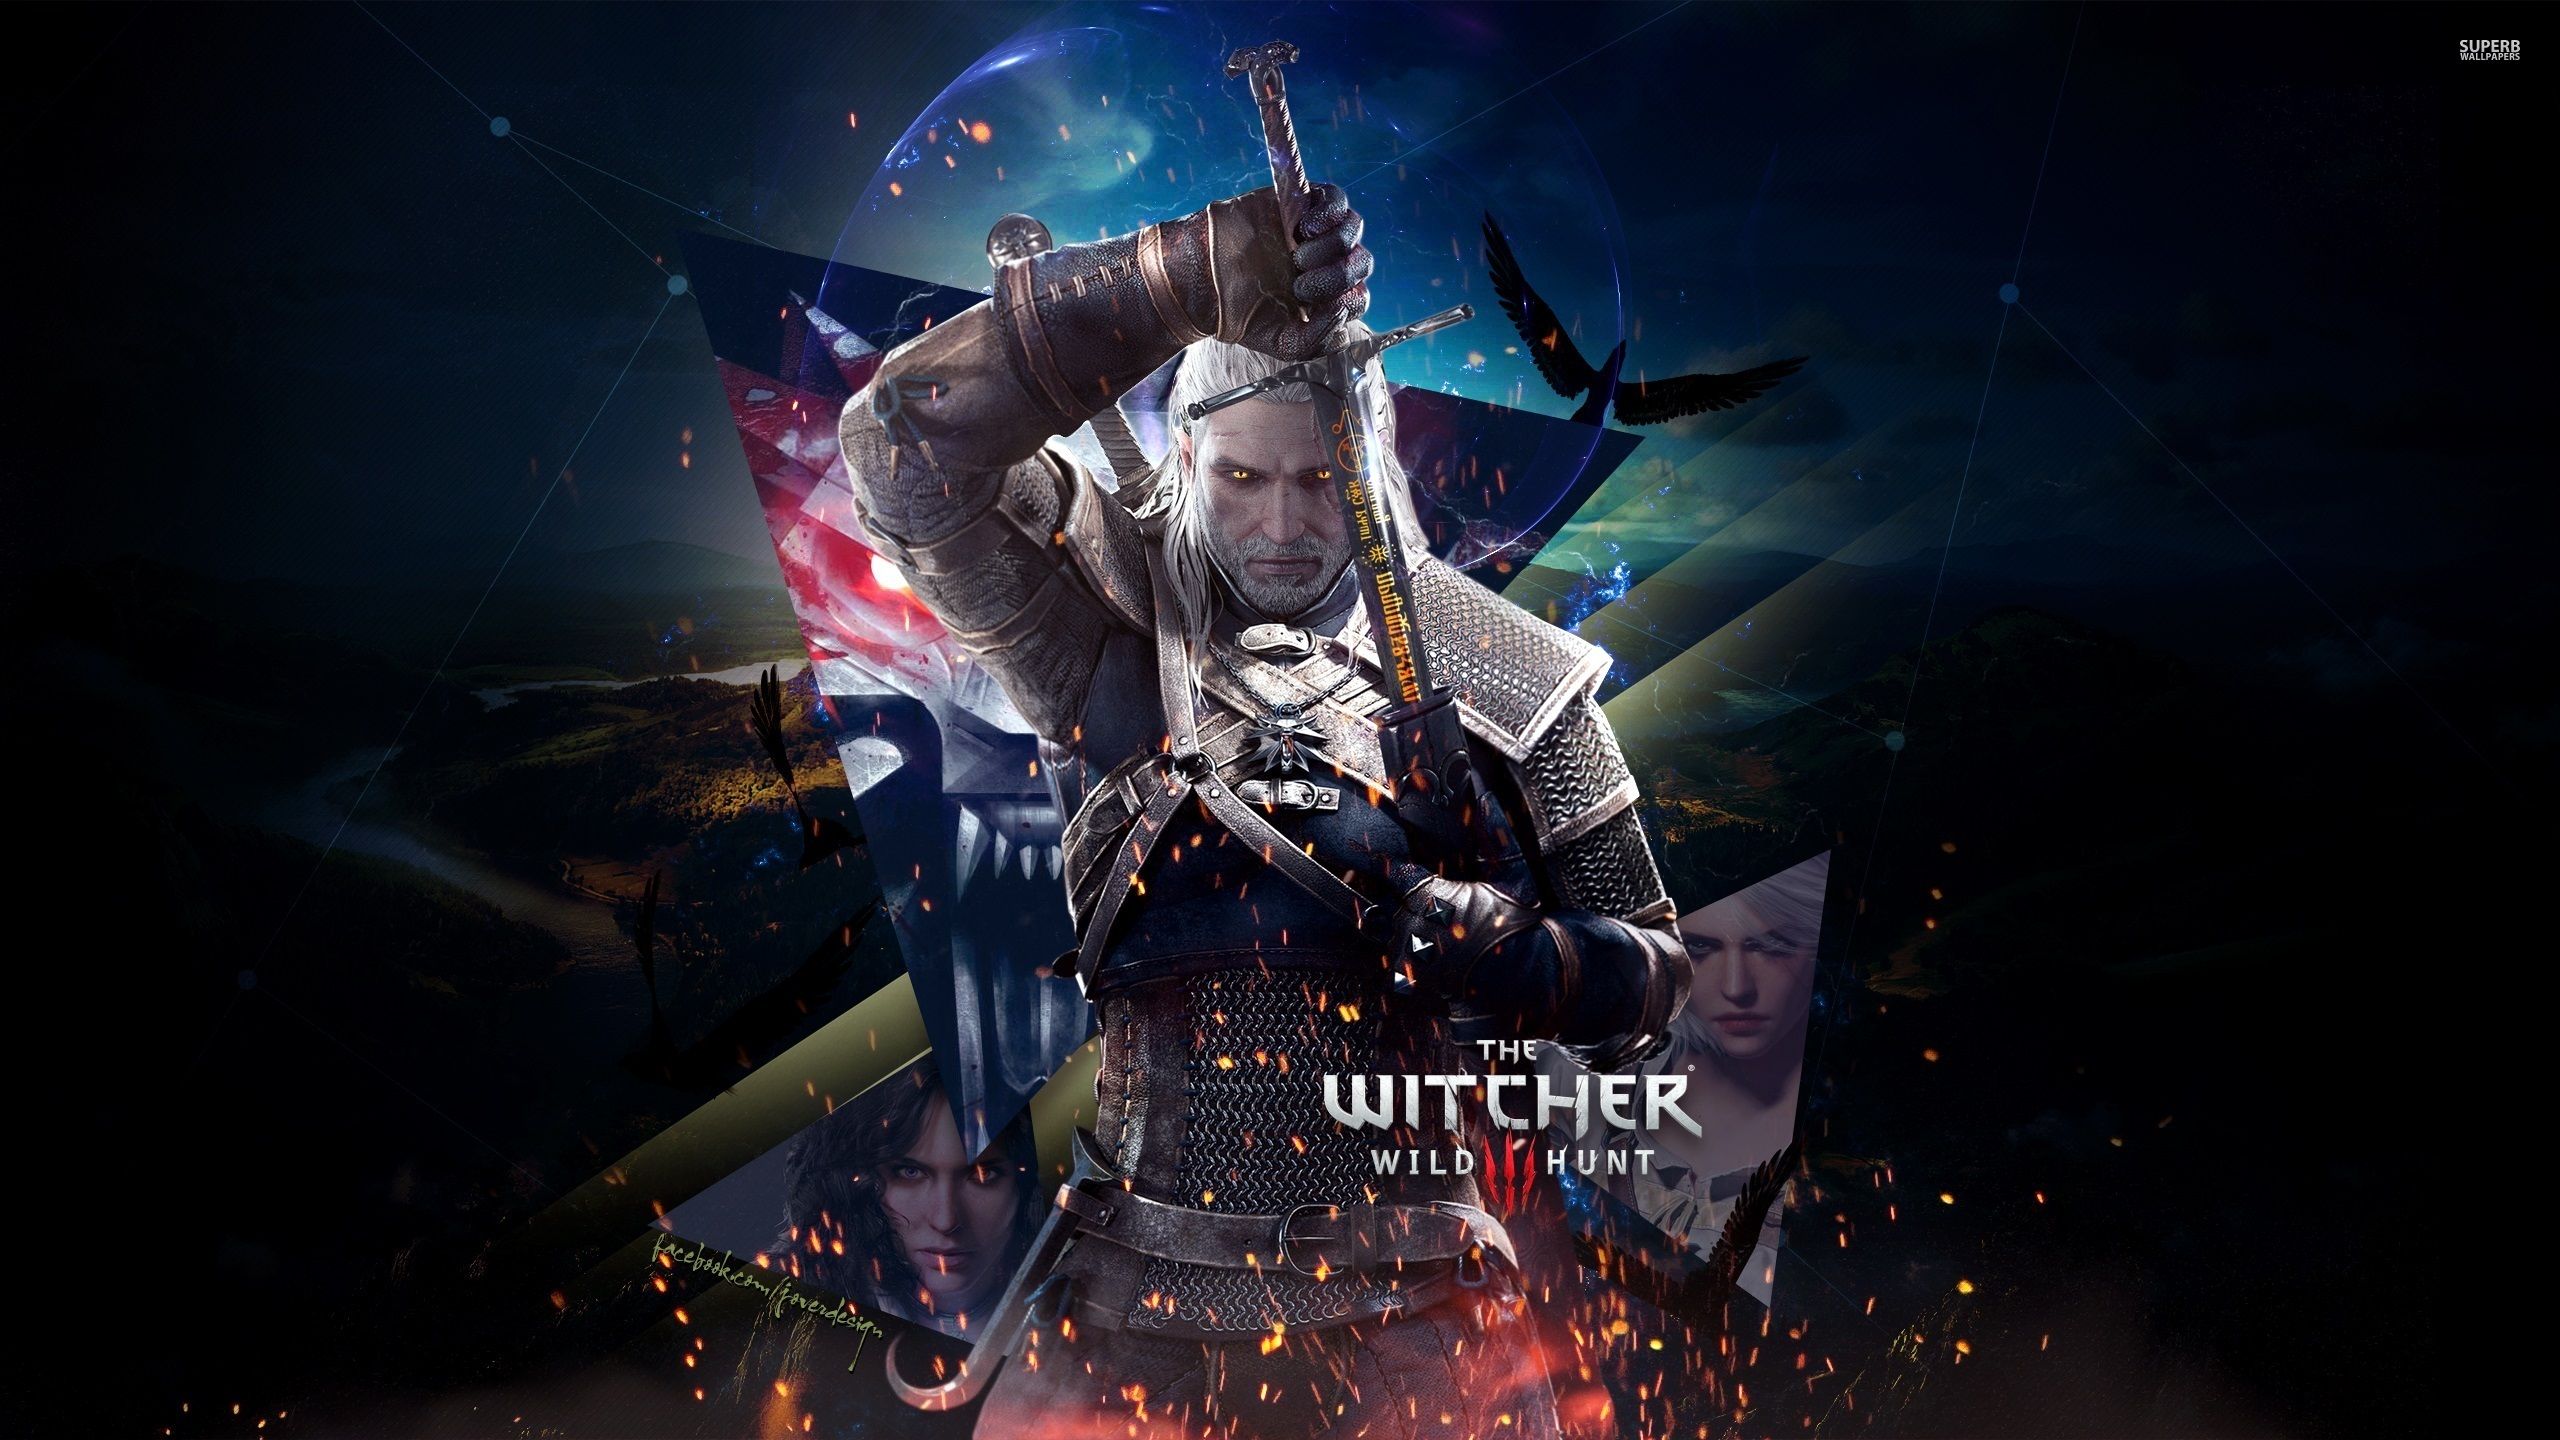 The Witcher 3: Wild Hunt wallpaper - Game wallpapers - #31455